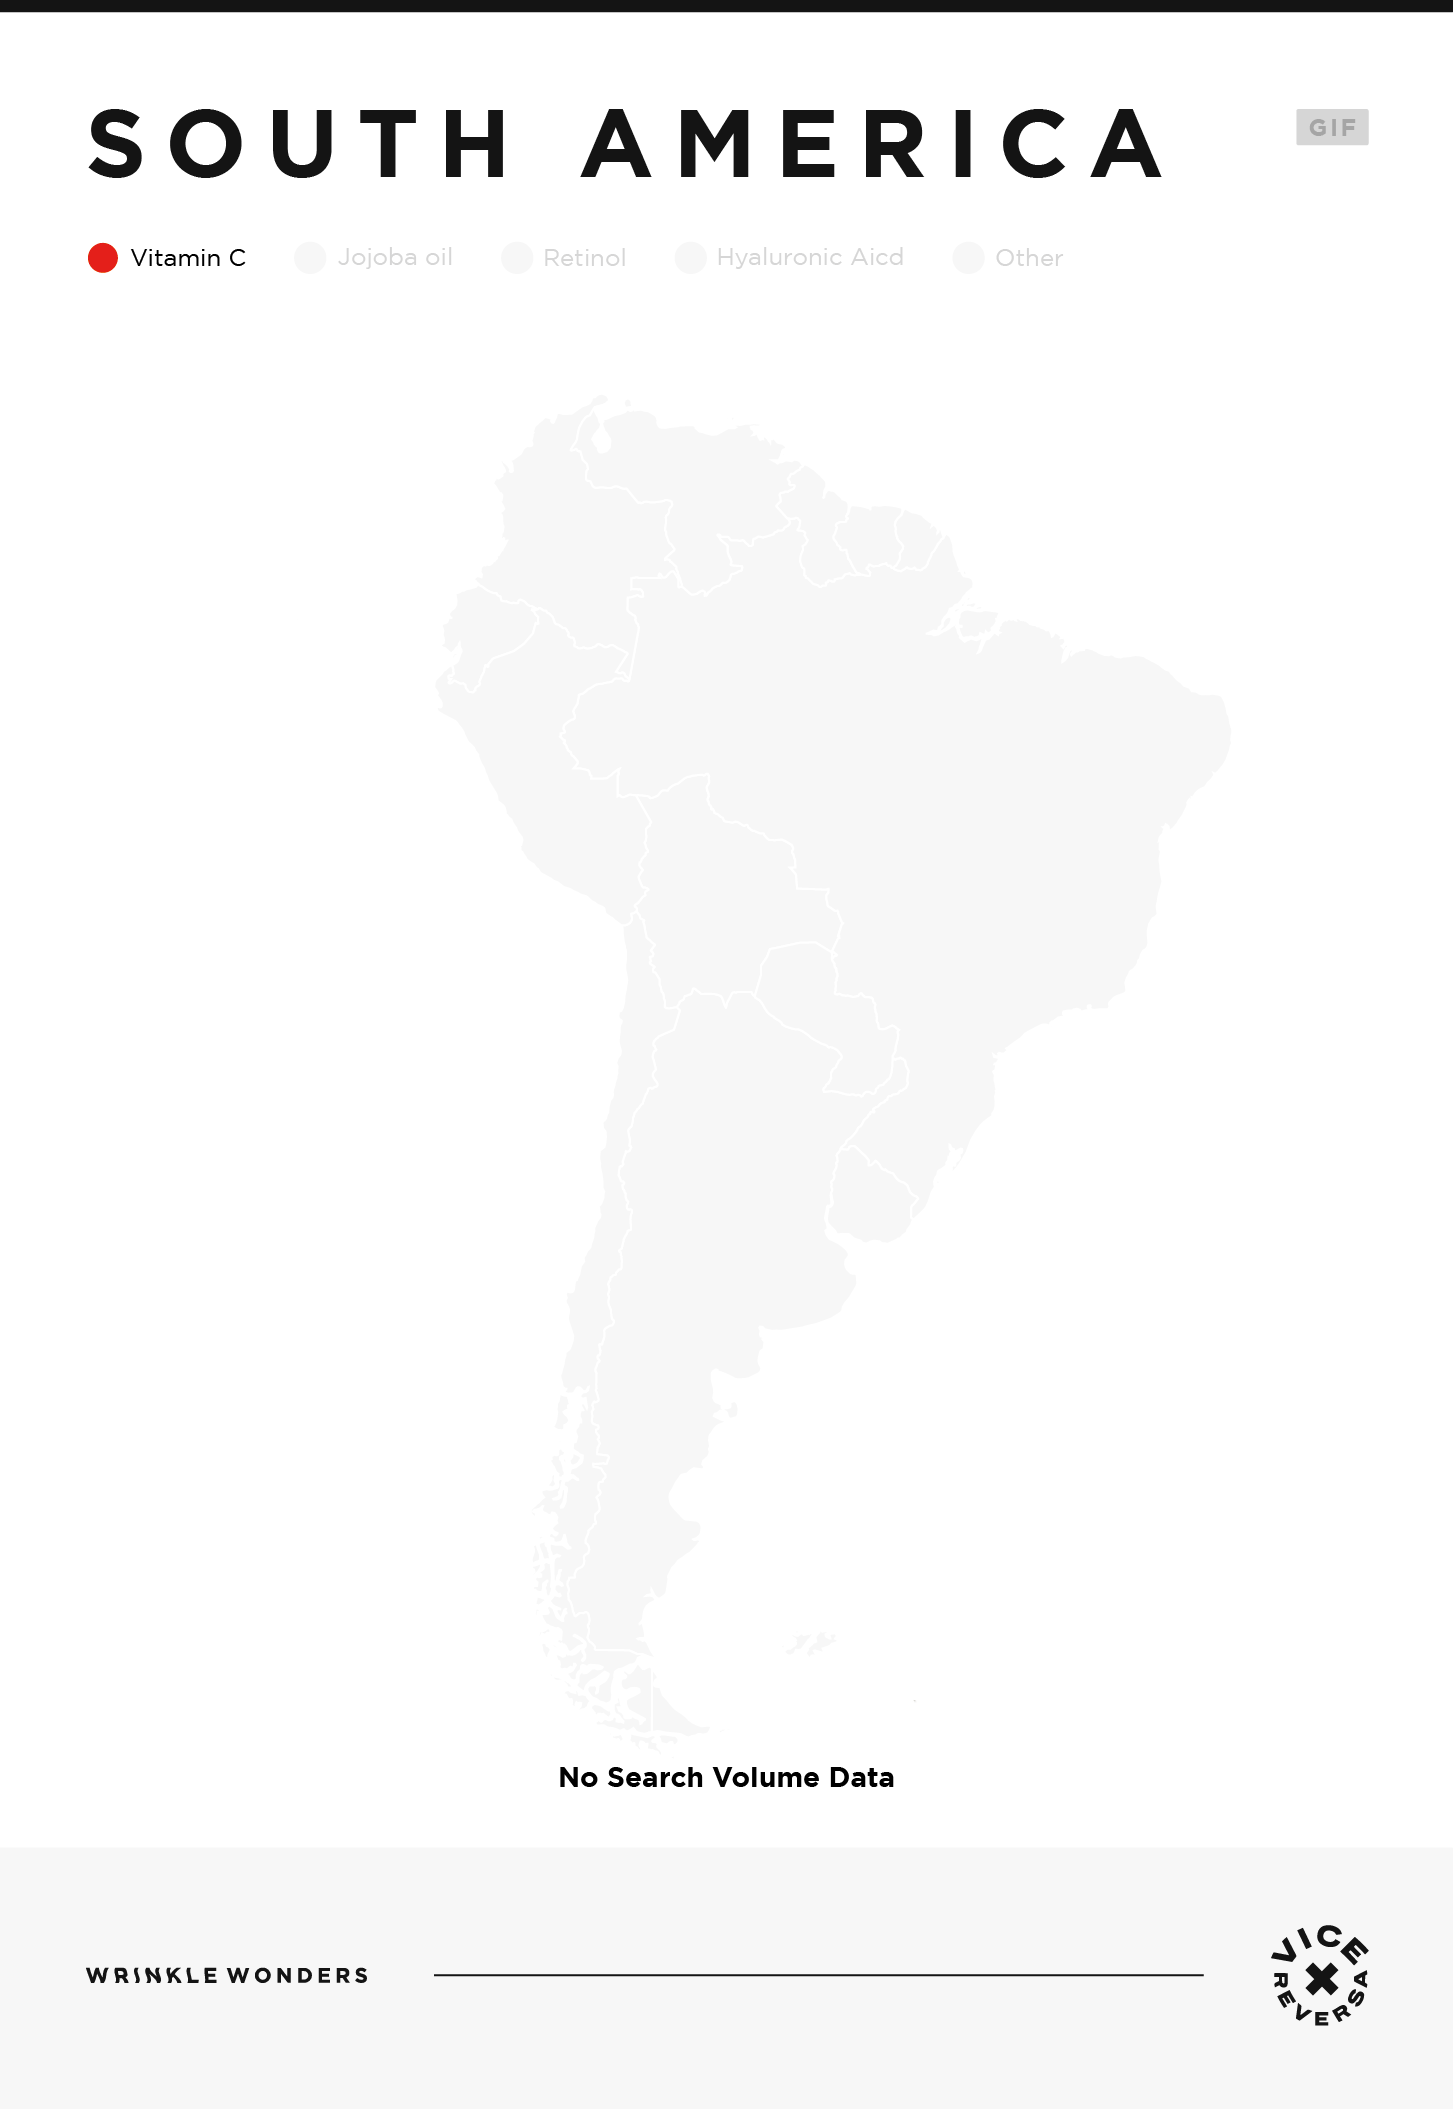 An interactive map showing the most searched for anti-wrinkle products in South America.